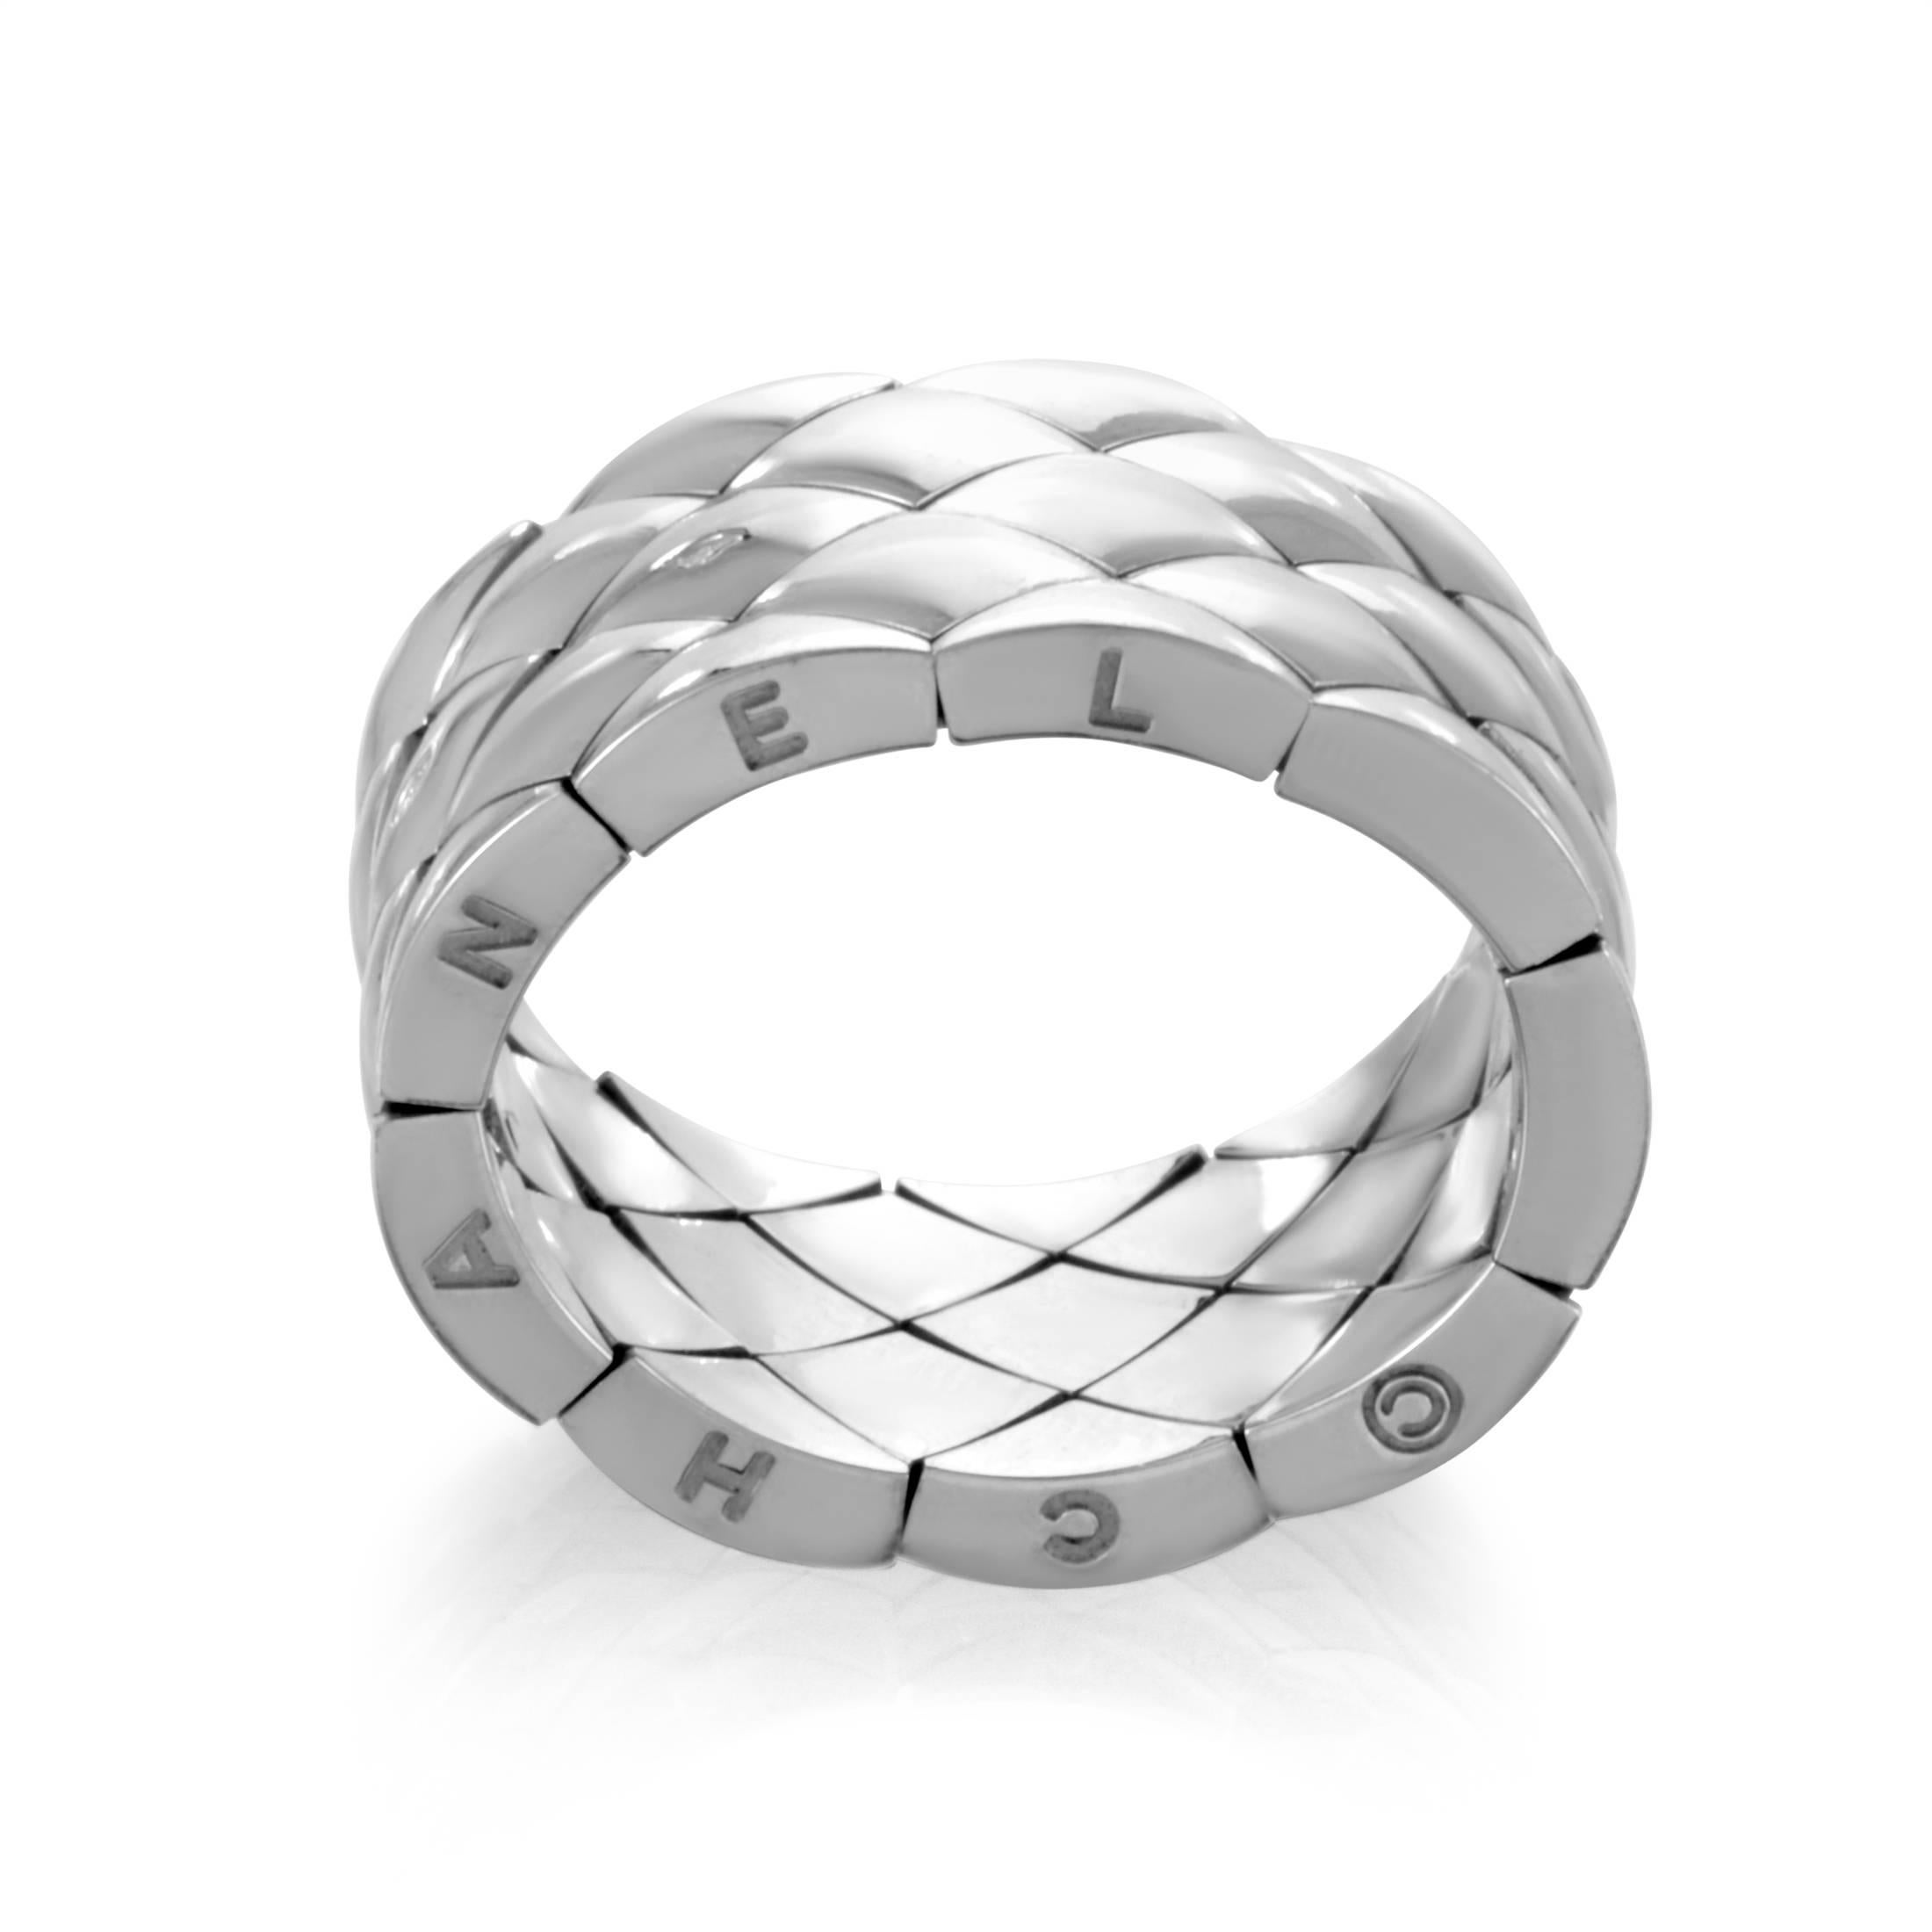 Striking lines slice through the immaculately gleaming 18K white gold surface to create the magnificent diamond pattern in this sublime ring from Cartier 
Ring Size: 9.0 (59)
Band Thickness: 14 mm
Included Items: Manufacturer's Box